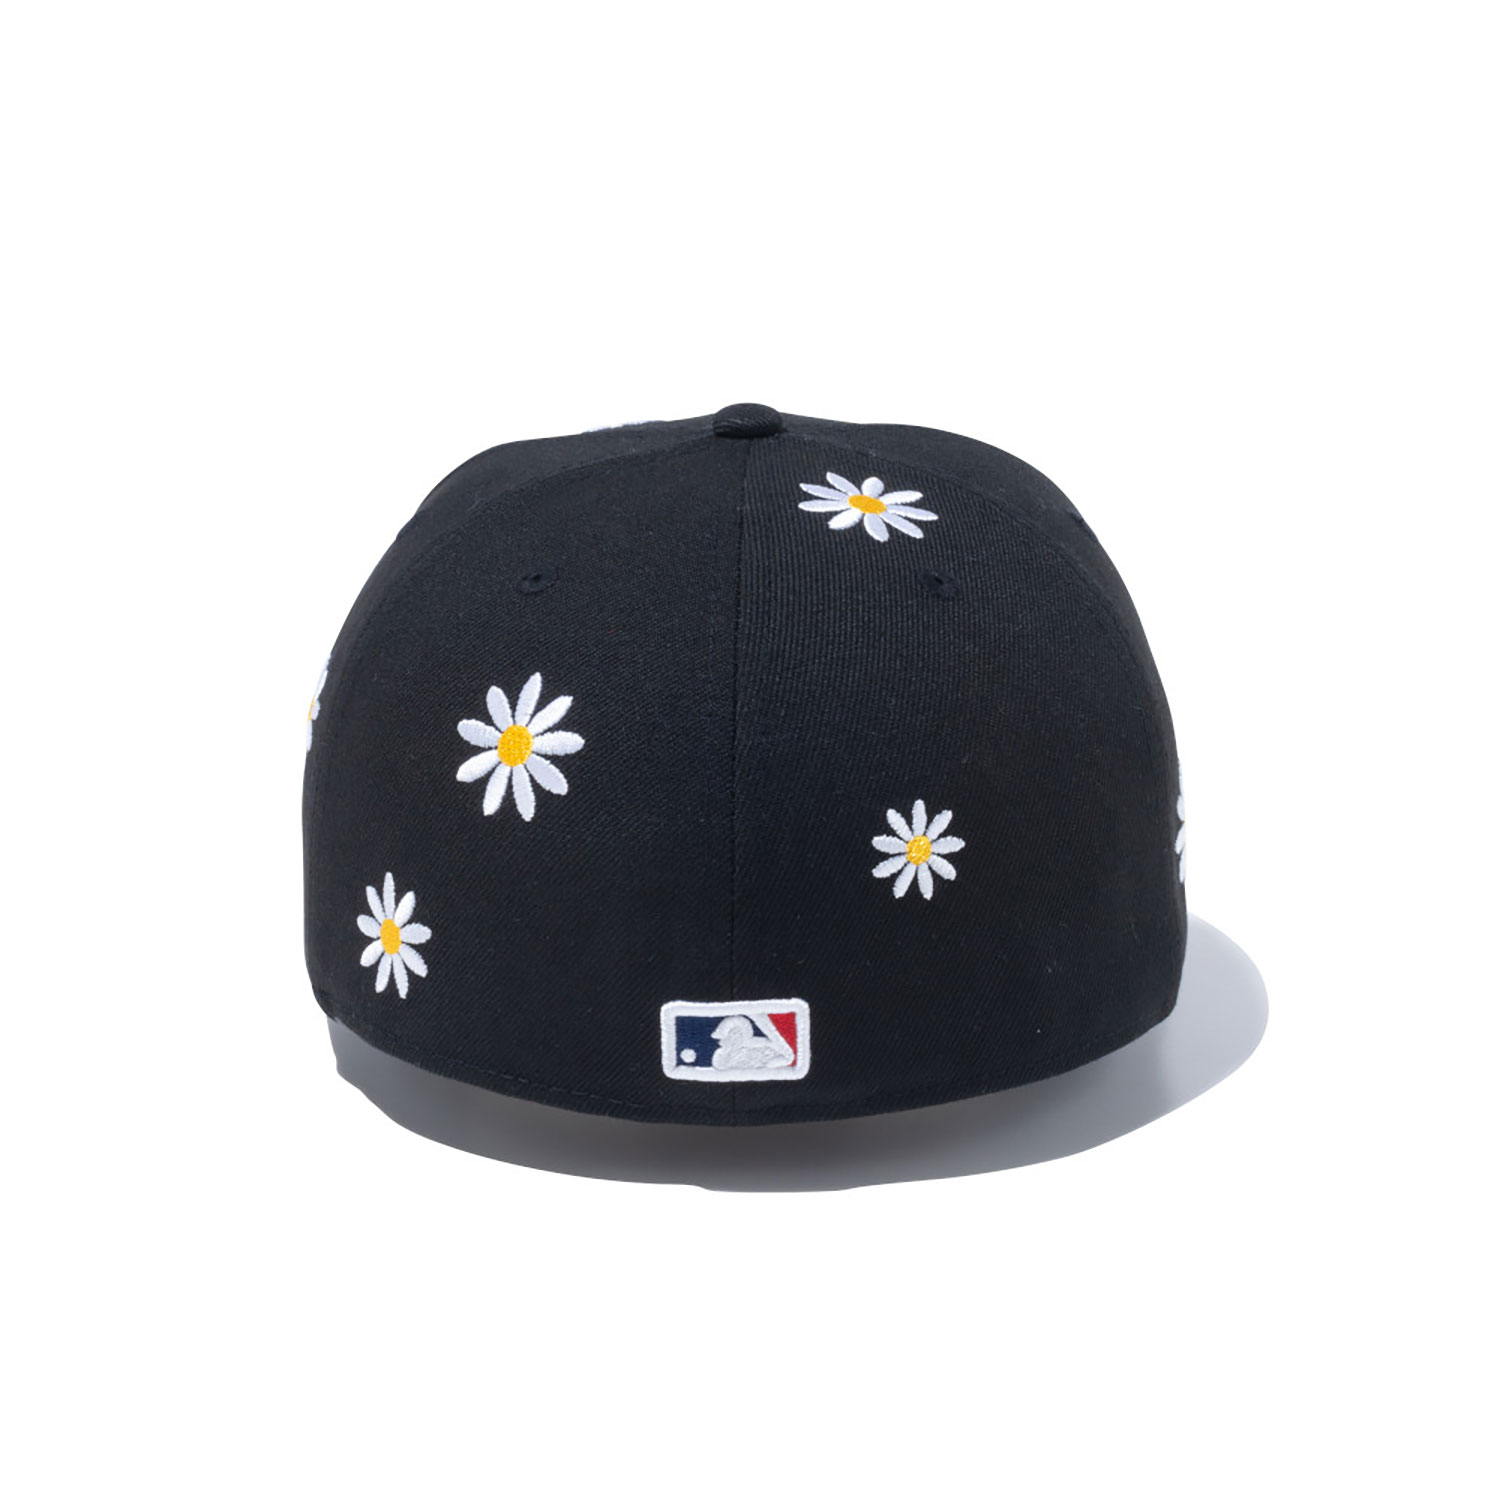 LA Dodgers Flower Embroidery New Era Japan Black 59FIFTY Fitted Cap